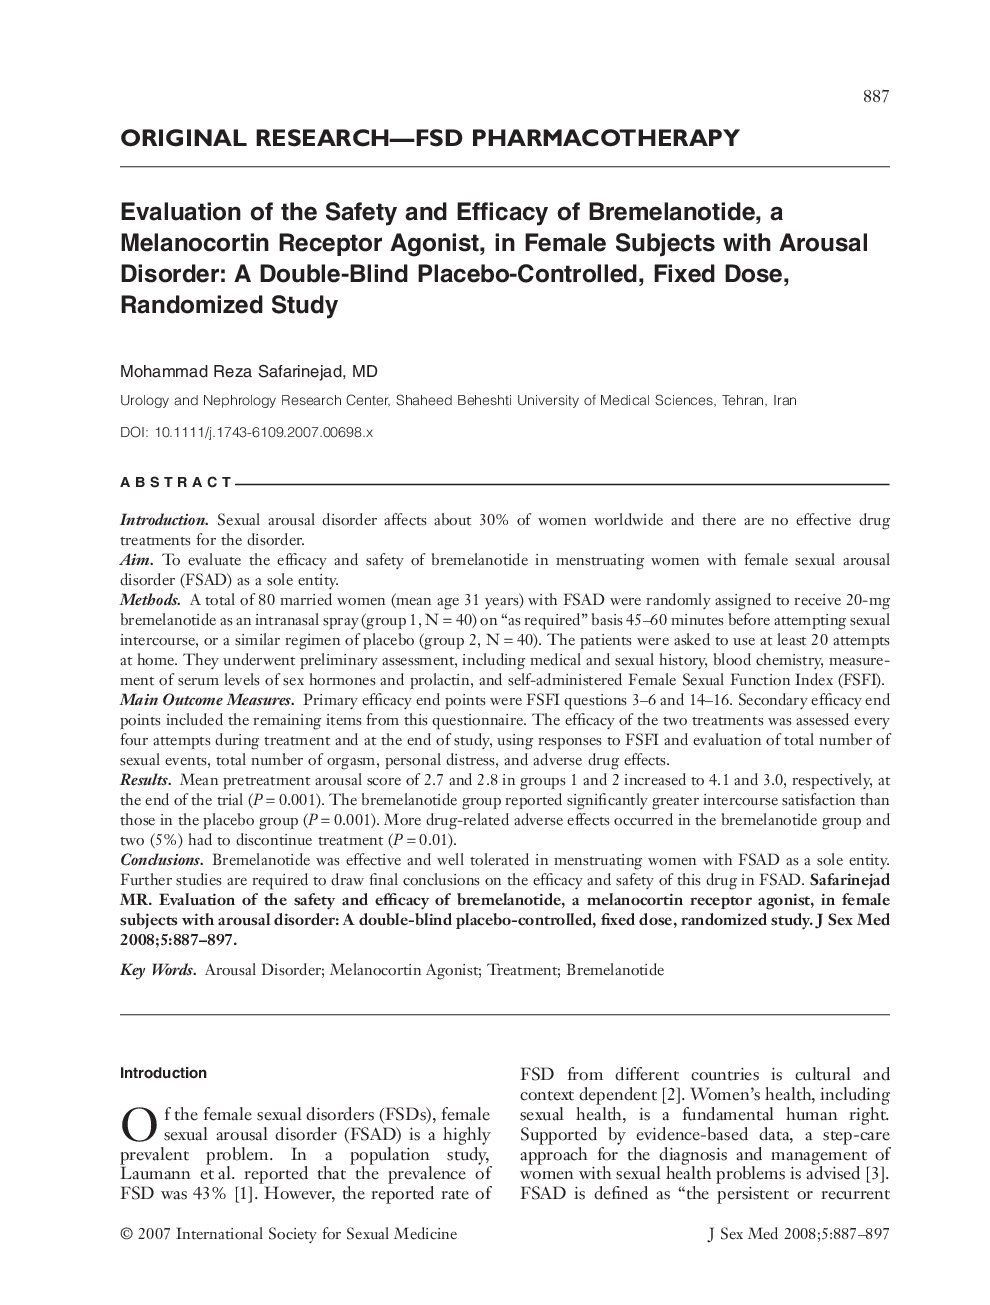 RETRACTED: Evaluation of the Safety and Efficacy of Bremelanotide, a Melanocortin Receptor Agonist, in Female Subjects with Arousal Disorder: A Double-Blind Placebo-Controlled, Fixed Dose, Randomized Study